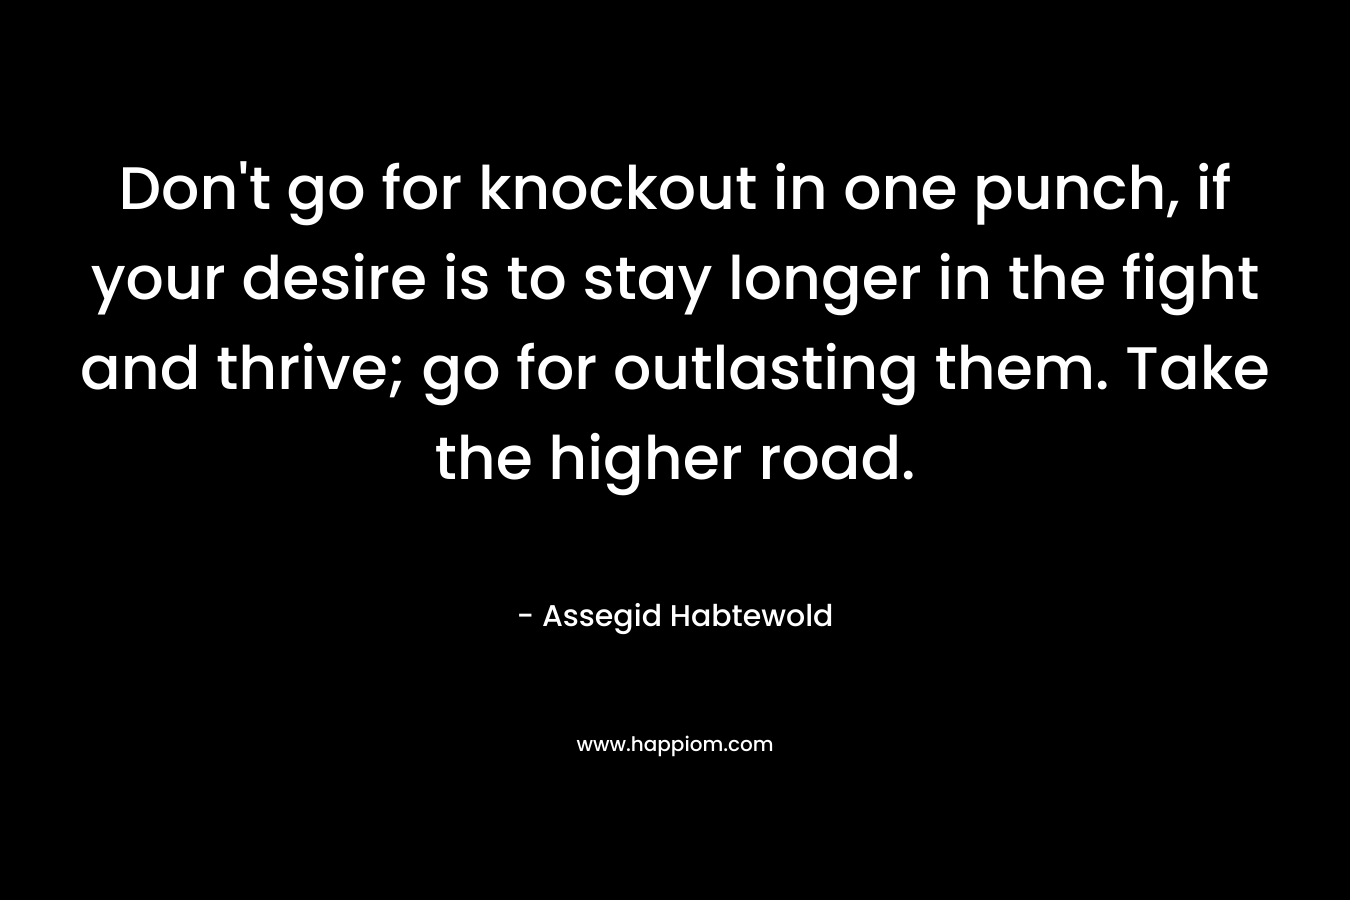 Don't go for knockout in one punch, if your desire is to stay longer in the fight and thrive; go for outlasting them. Take the higher road.